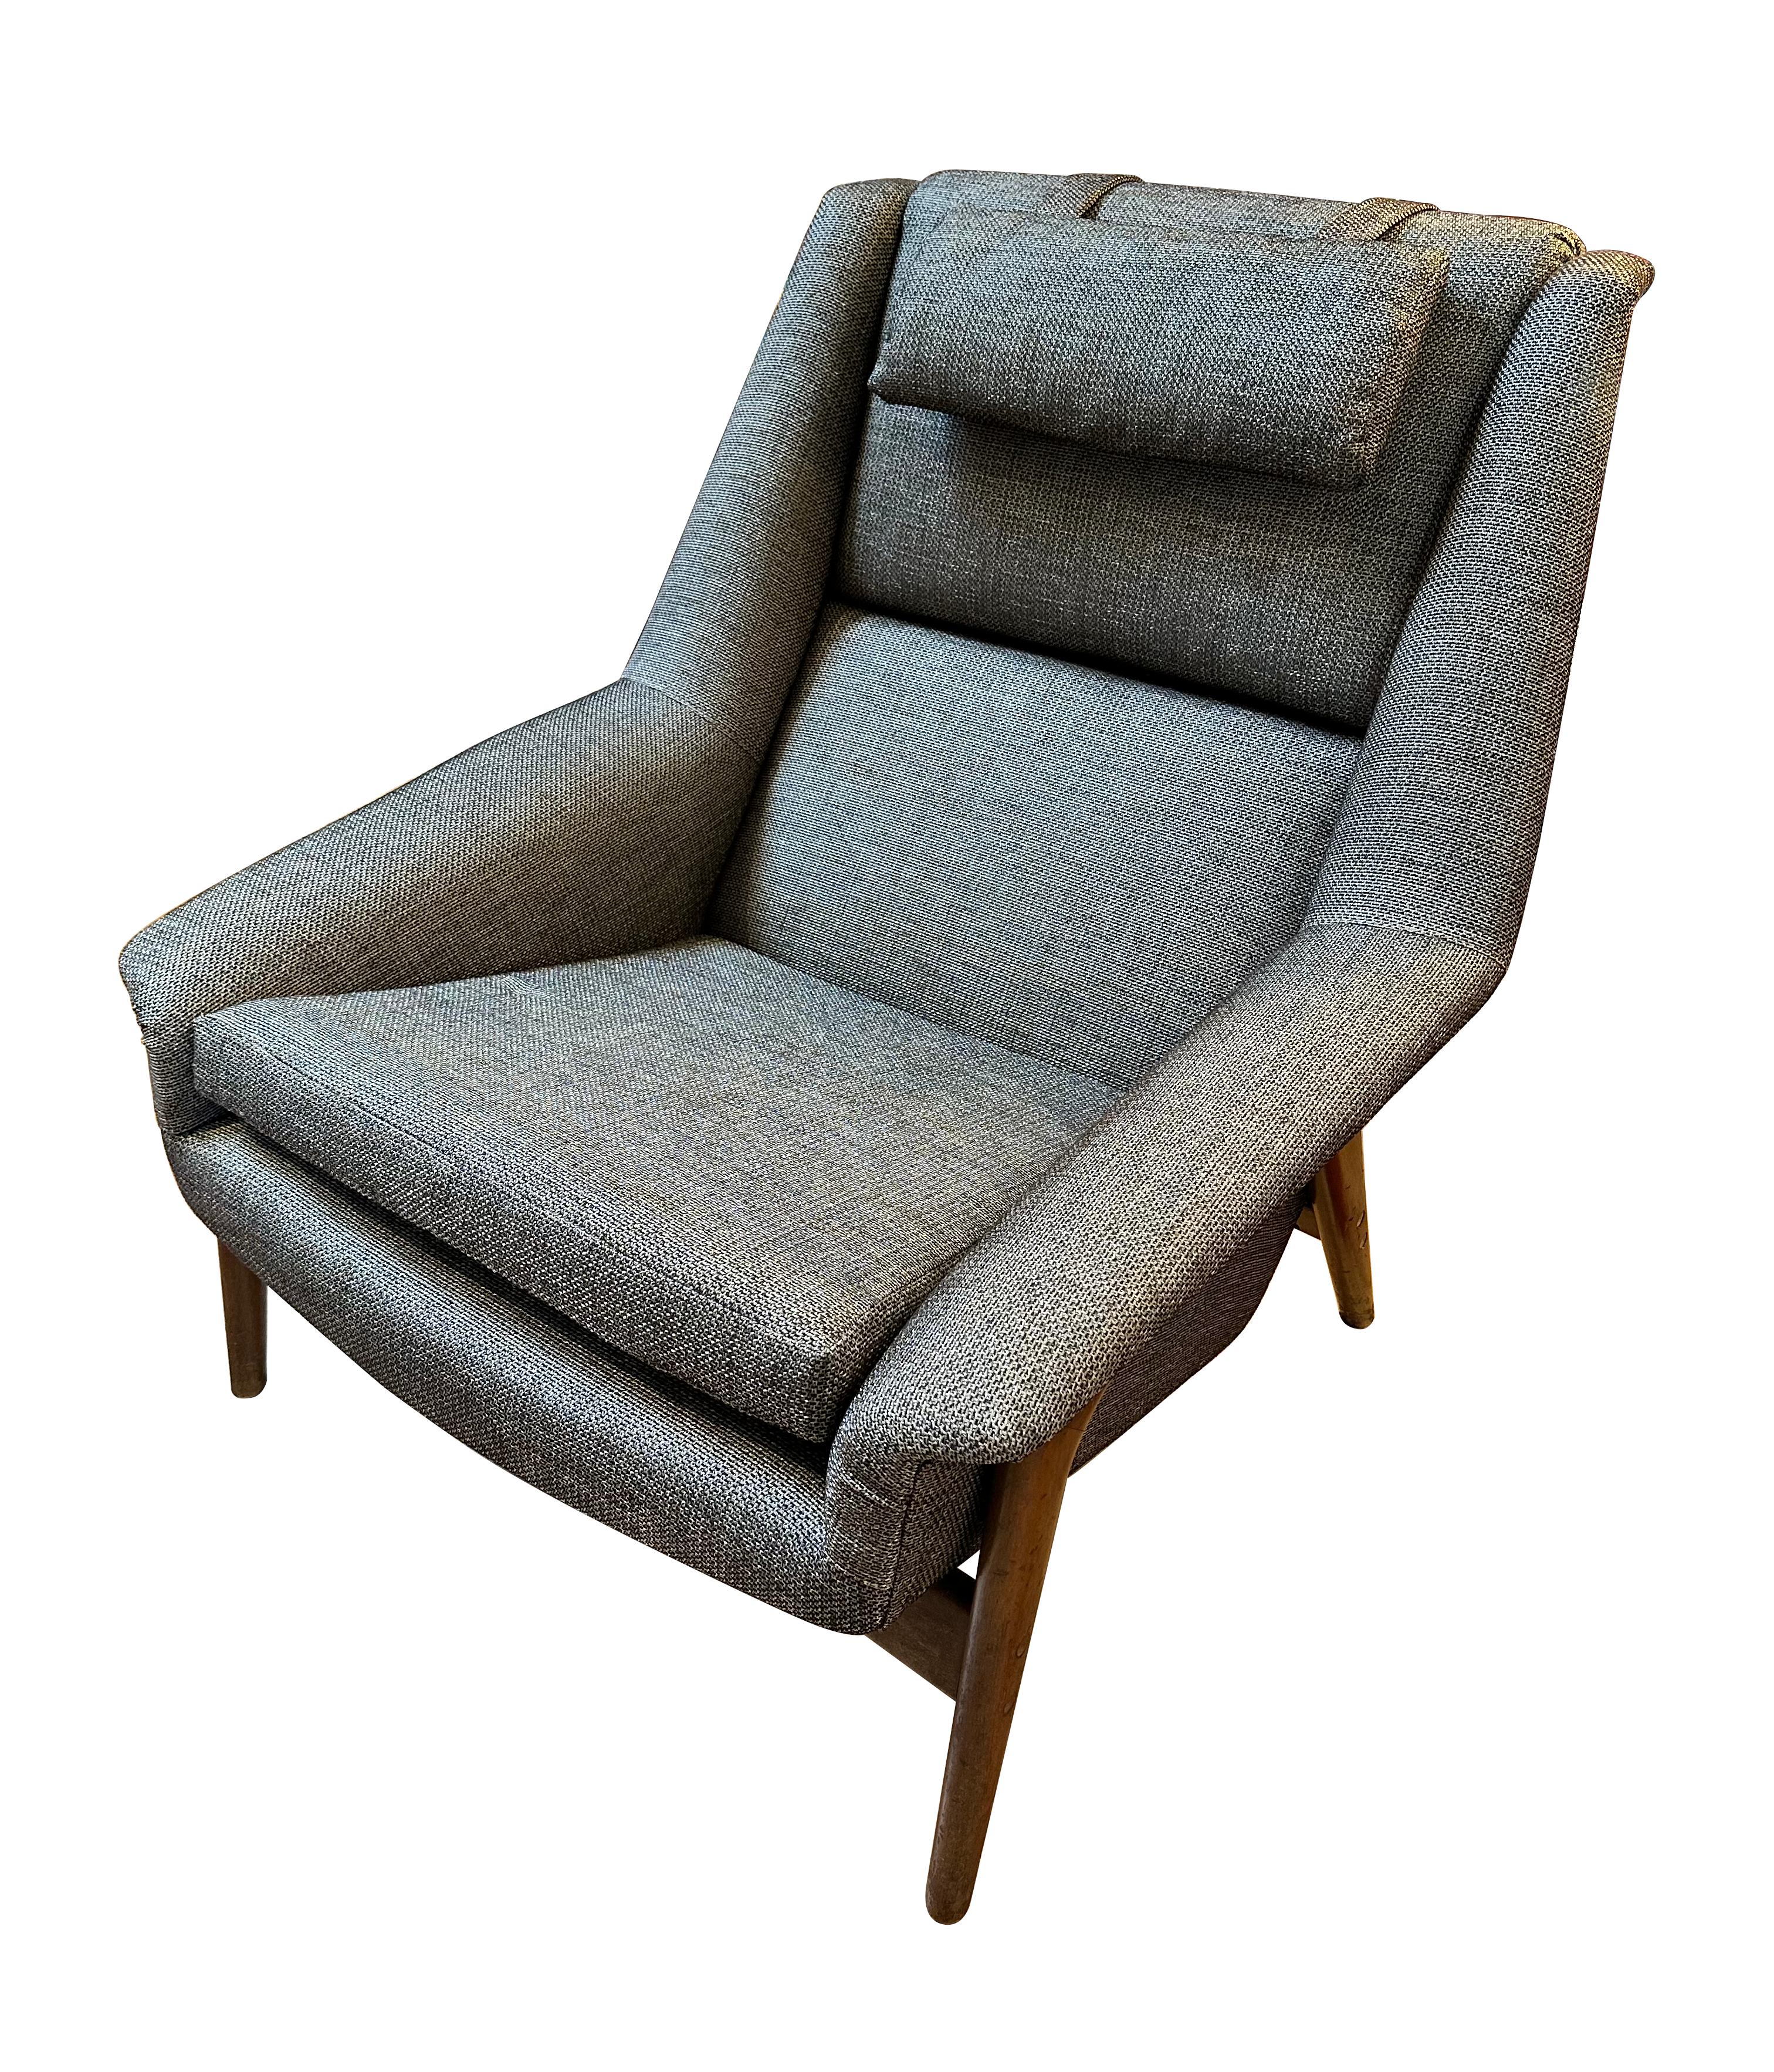 1960s Scandinavian Modern Profil lounge chair designed by Folke Ohlsson for Dux Sweden. The chair has been professionally reupholstered with new material, and has a removeable headrest. The chair is fully upholstered with a teak frame. In excellent